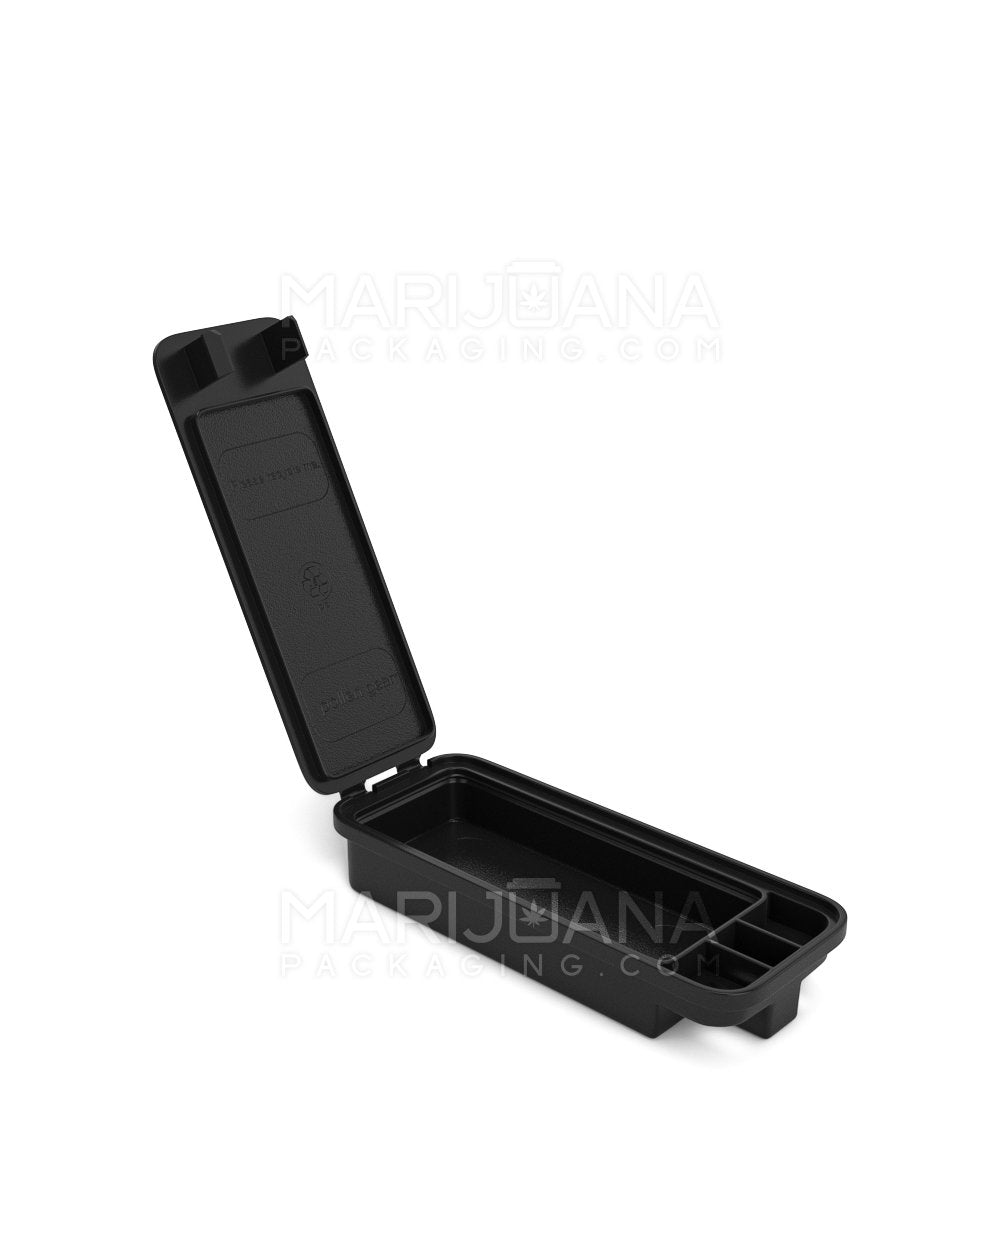 Child Resistant Snap Box Edible & Pre-Roll Joint Case | Small - Black Plastic | Sample - 1